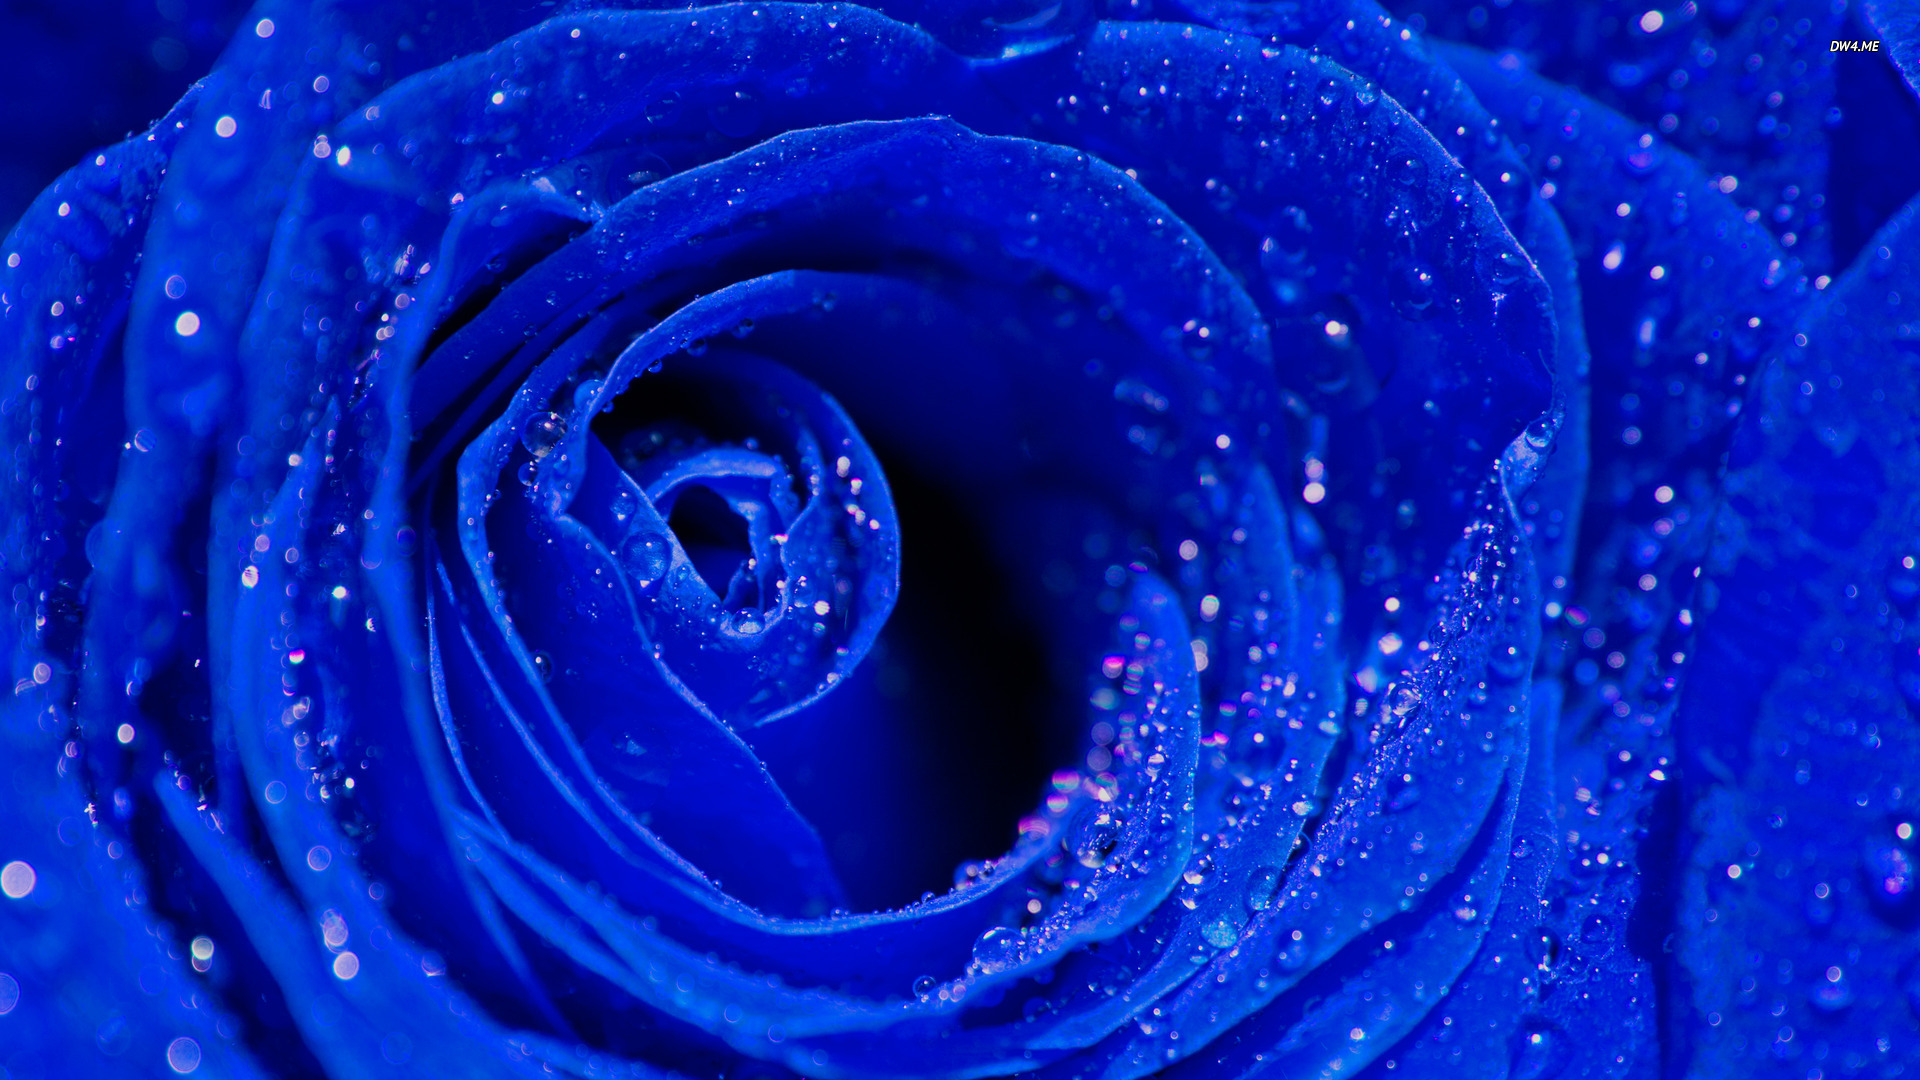 Blue Roses Background Wallpaper High Definition